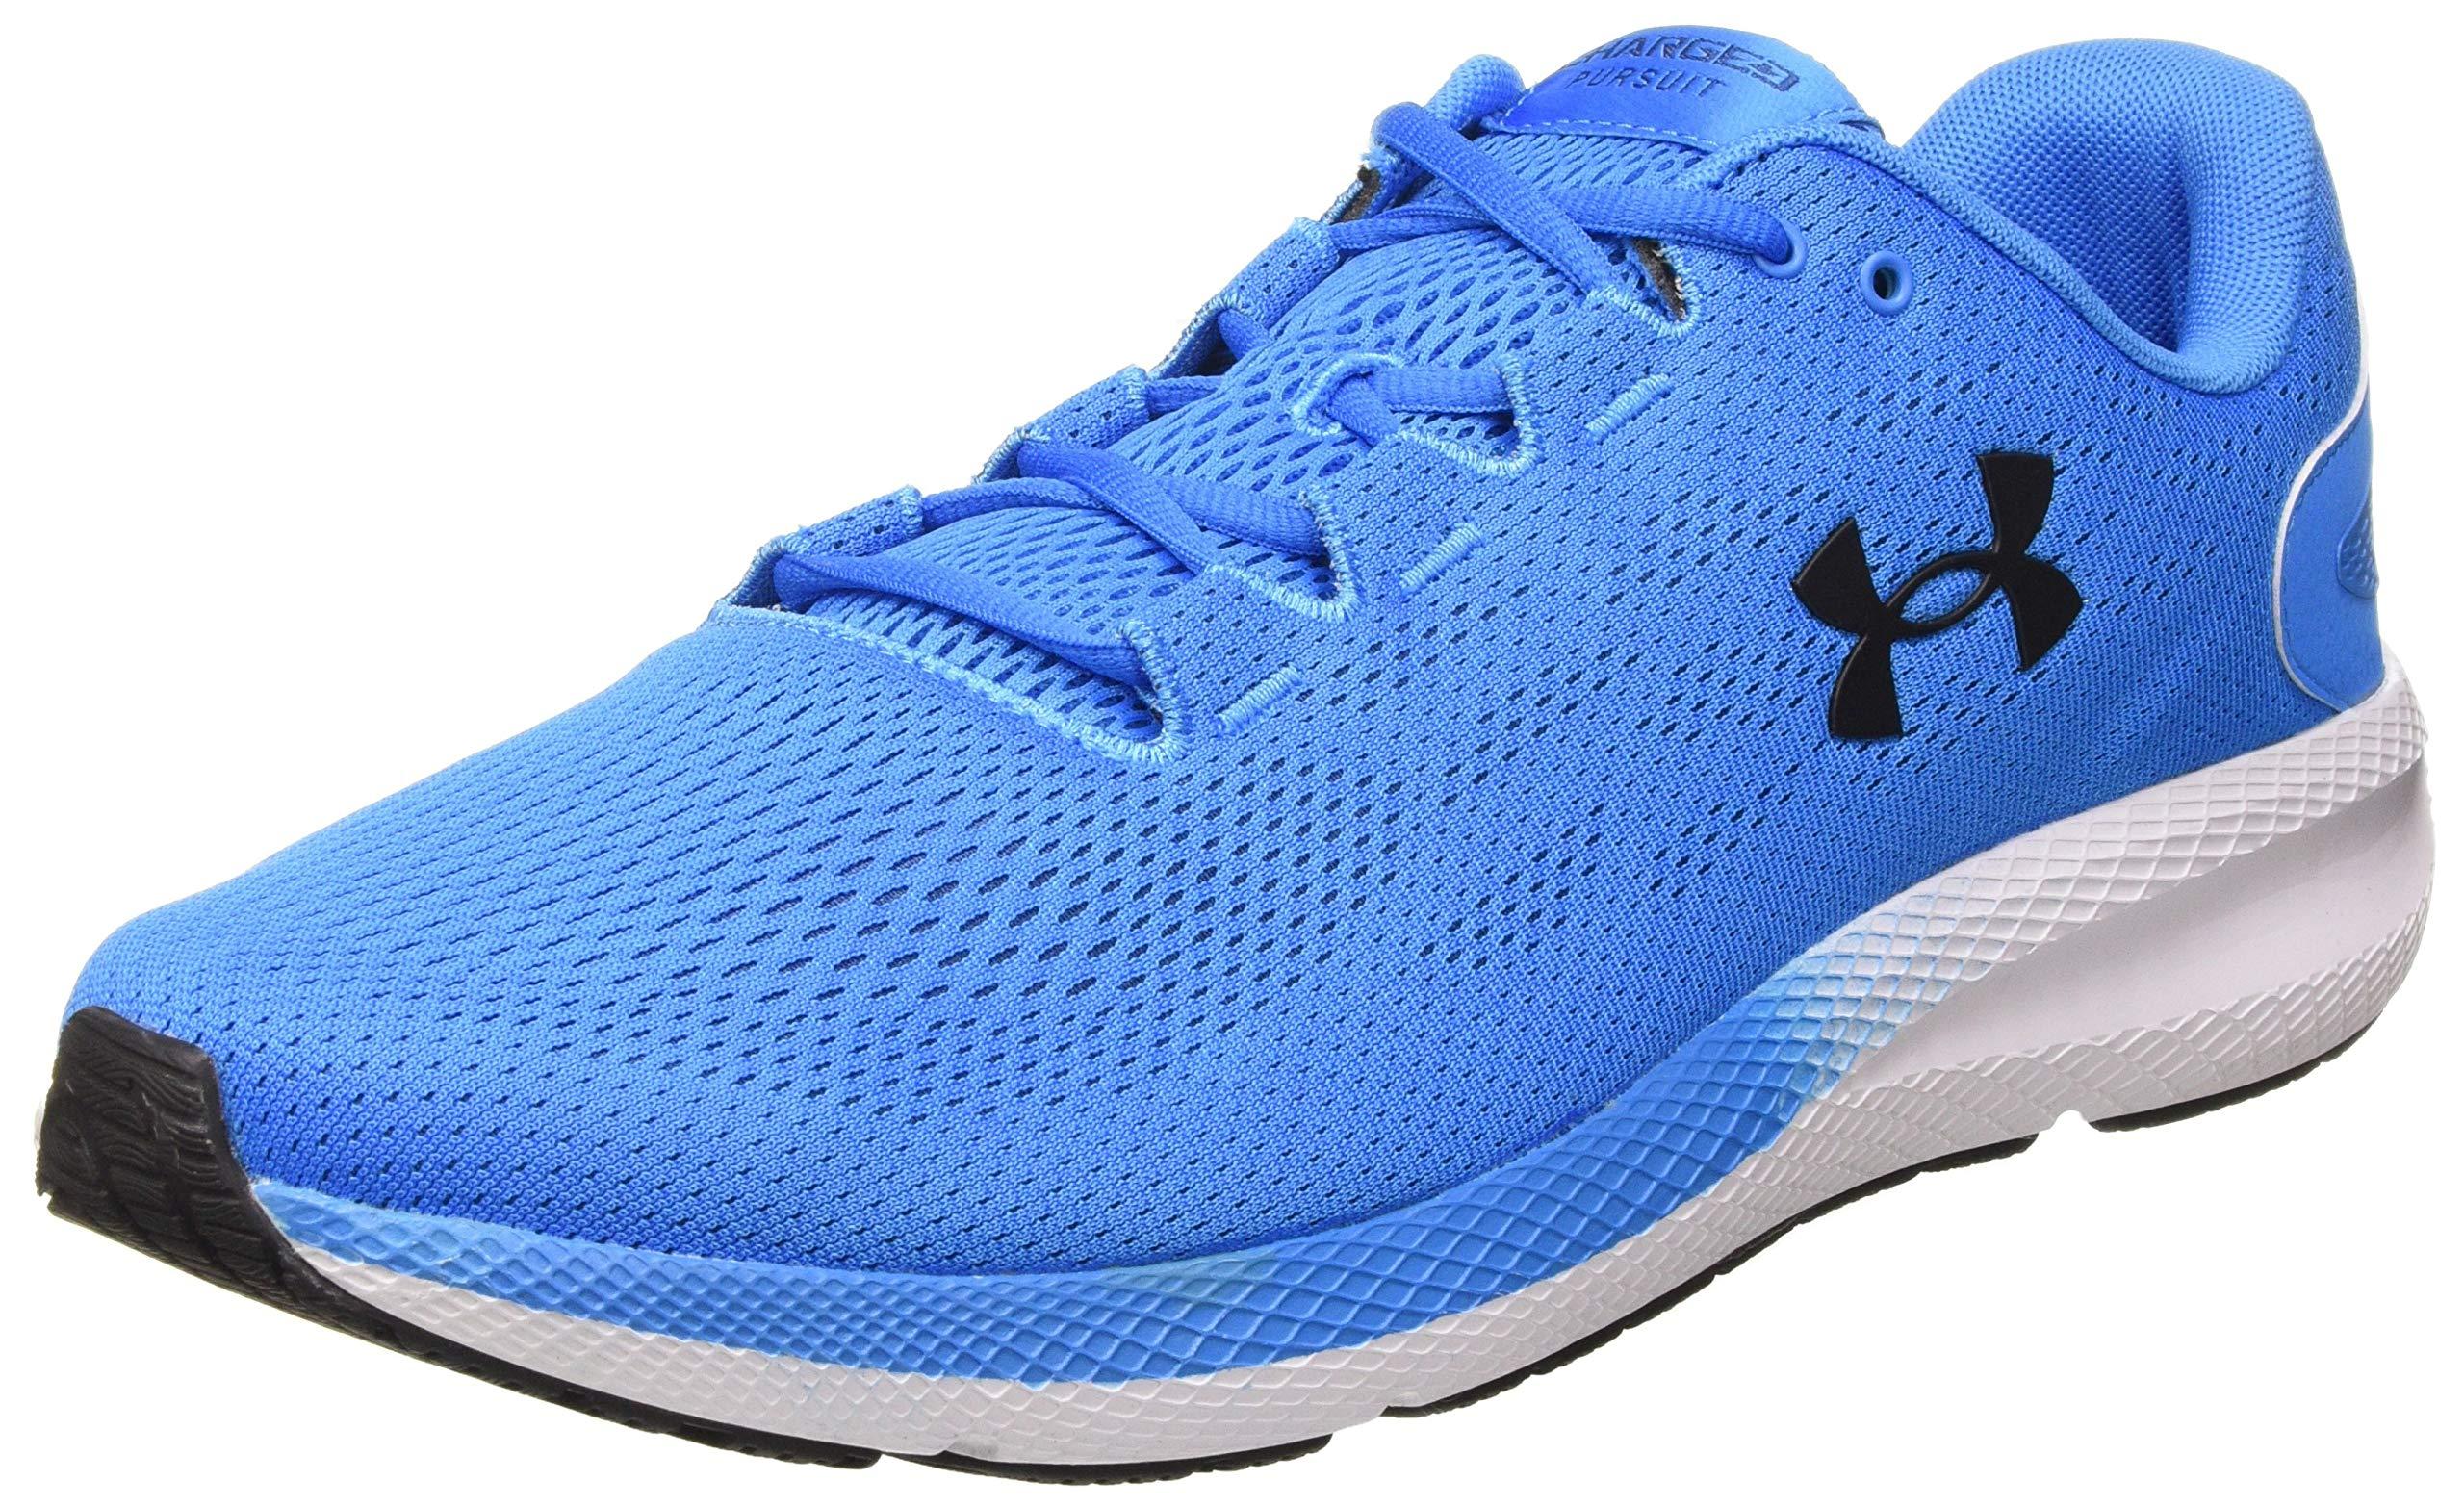 Under Armour Charged Pursuit 2 Running Shoe in Blue for Men - Save 26% ...